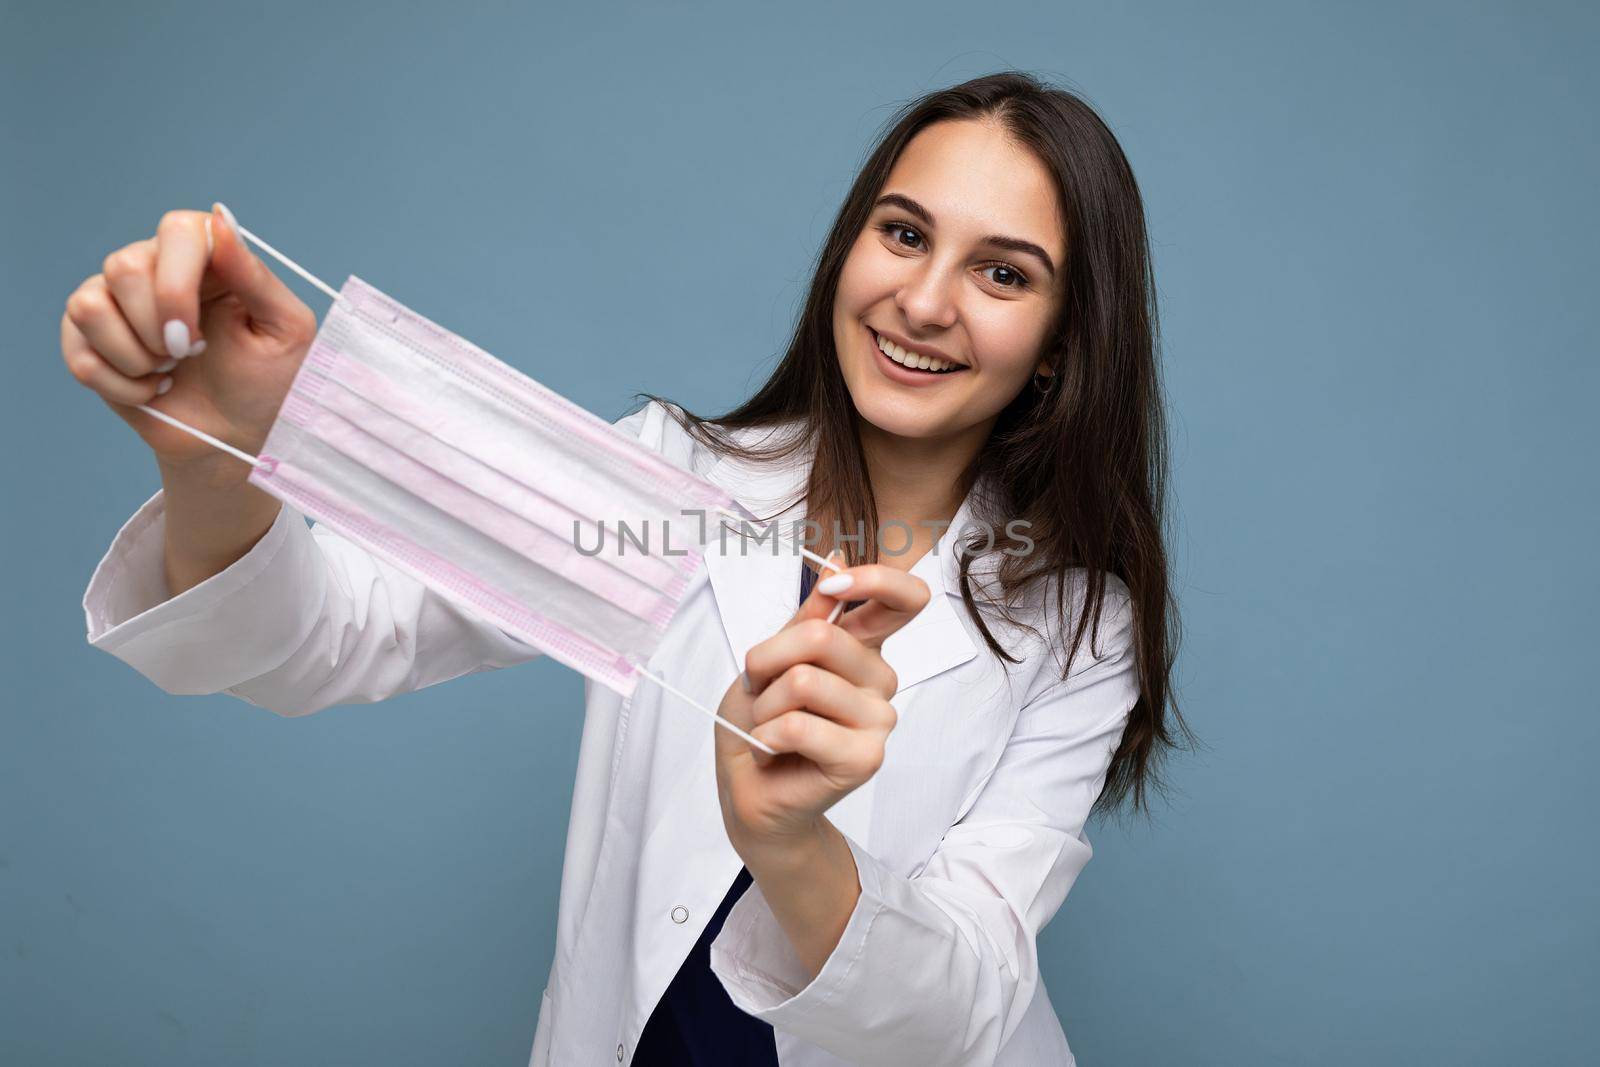 Happy young woman holds and wears a white medical mask to protect yourself from corona virus, cares for her health and safety, sticks to self-isolation. Concept of Covid-19.